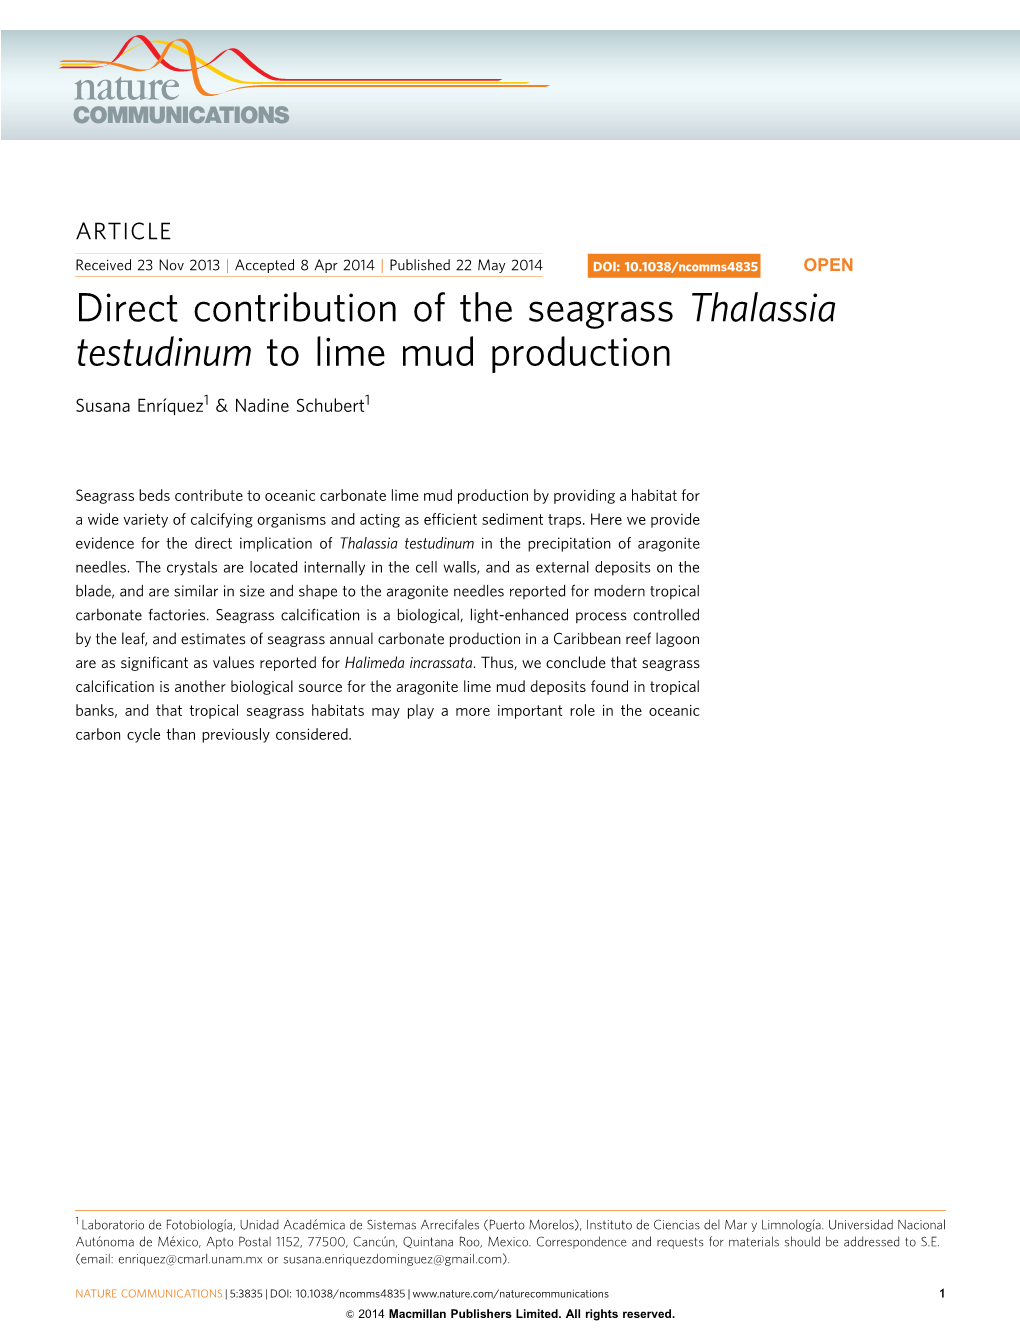 Thalassia Testudinum to Lime Mud Production